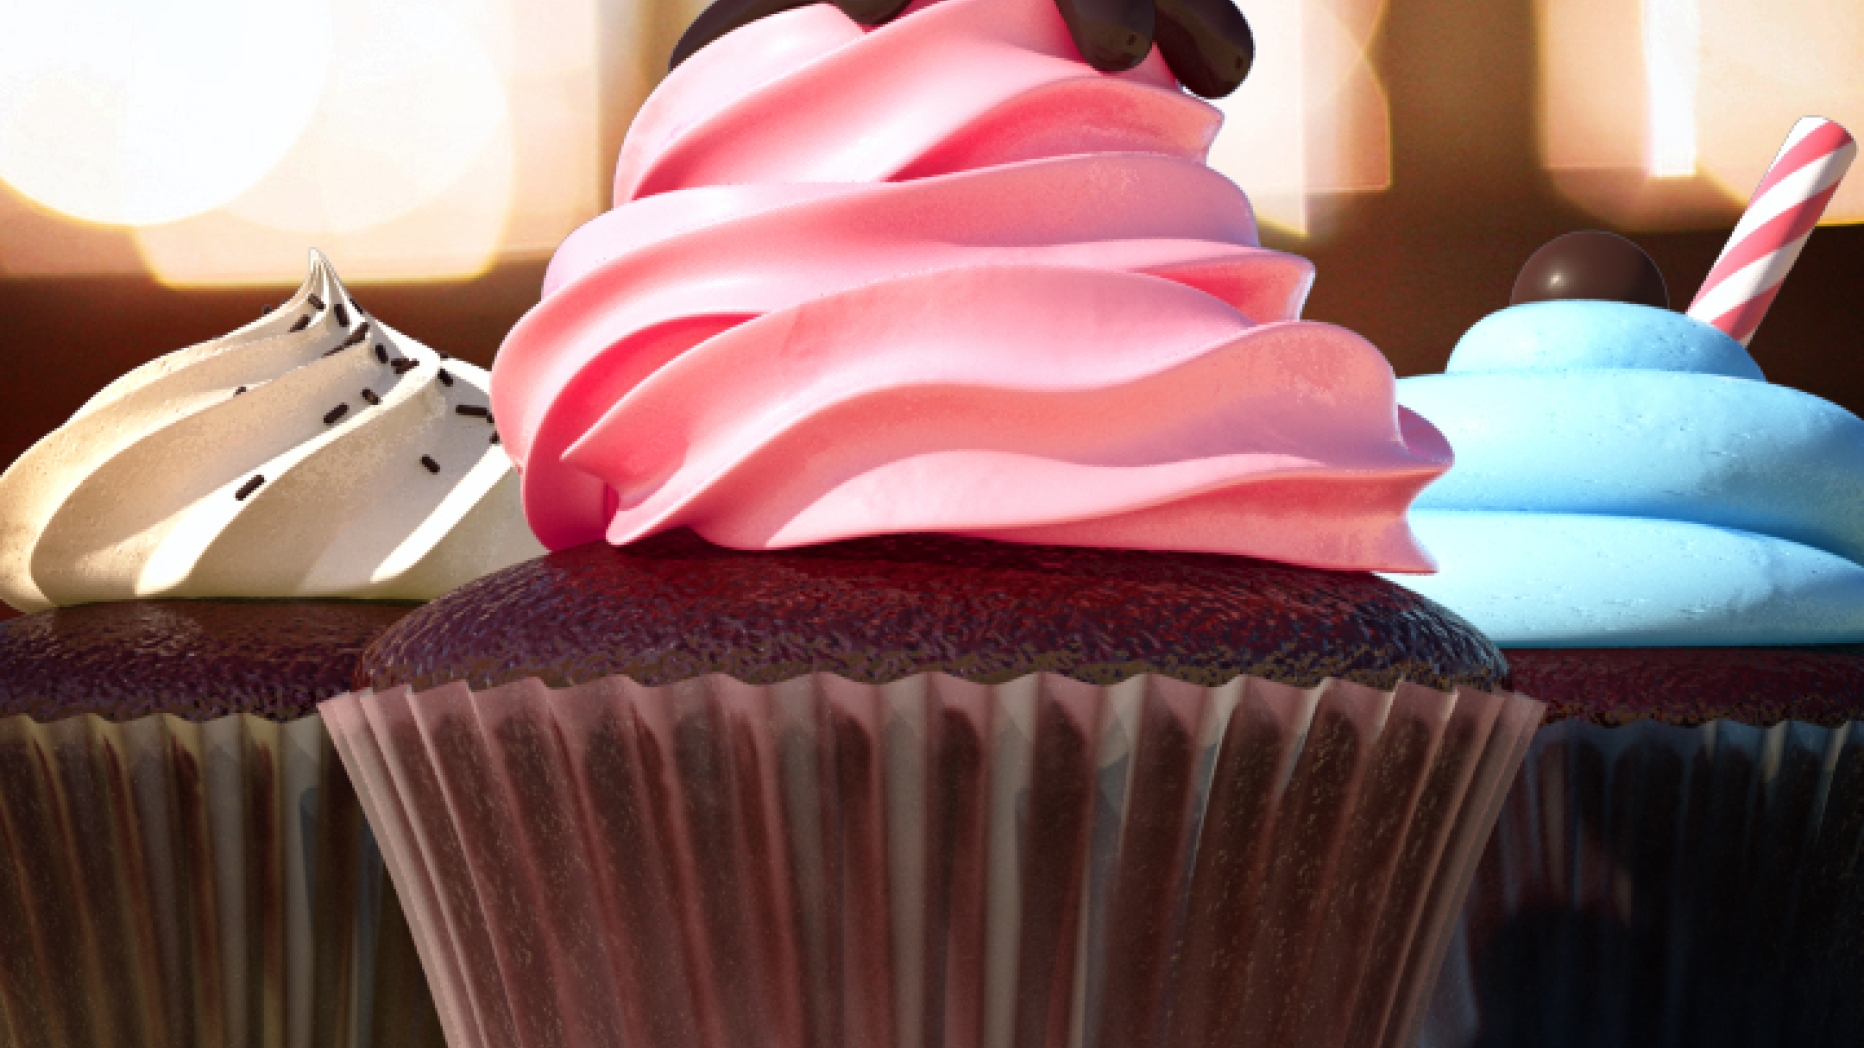 CGI graphic of three different chocolate cupcakes. One has blue icing with a candy cane sticking out. One has pink icing with chocolate syrup and a cherry on top. The third has white icing with chocolate sprinkles.